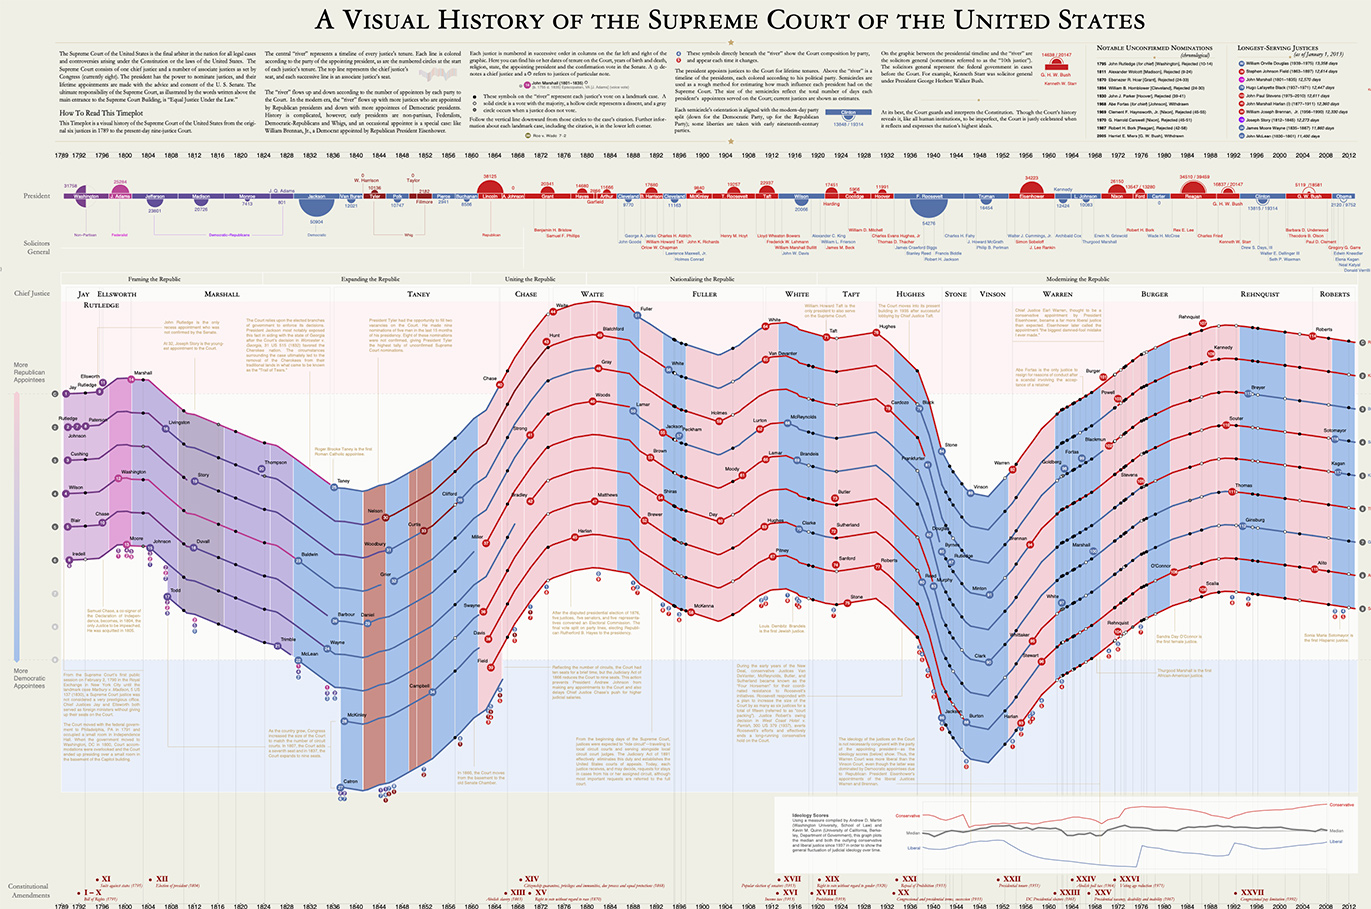 A visualization of the history of the U.S. Supreme Court, as part of the Timeplots series of posters